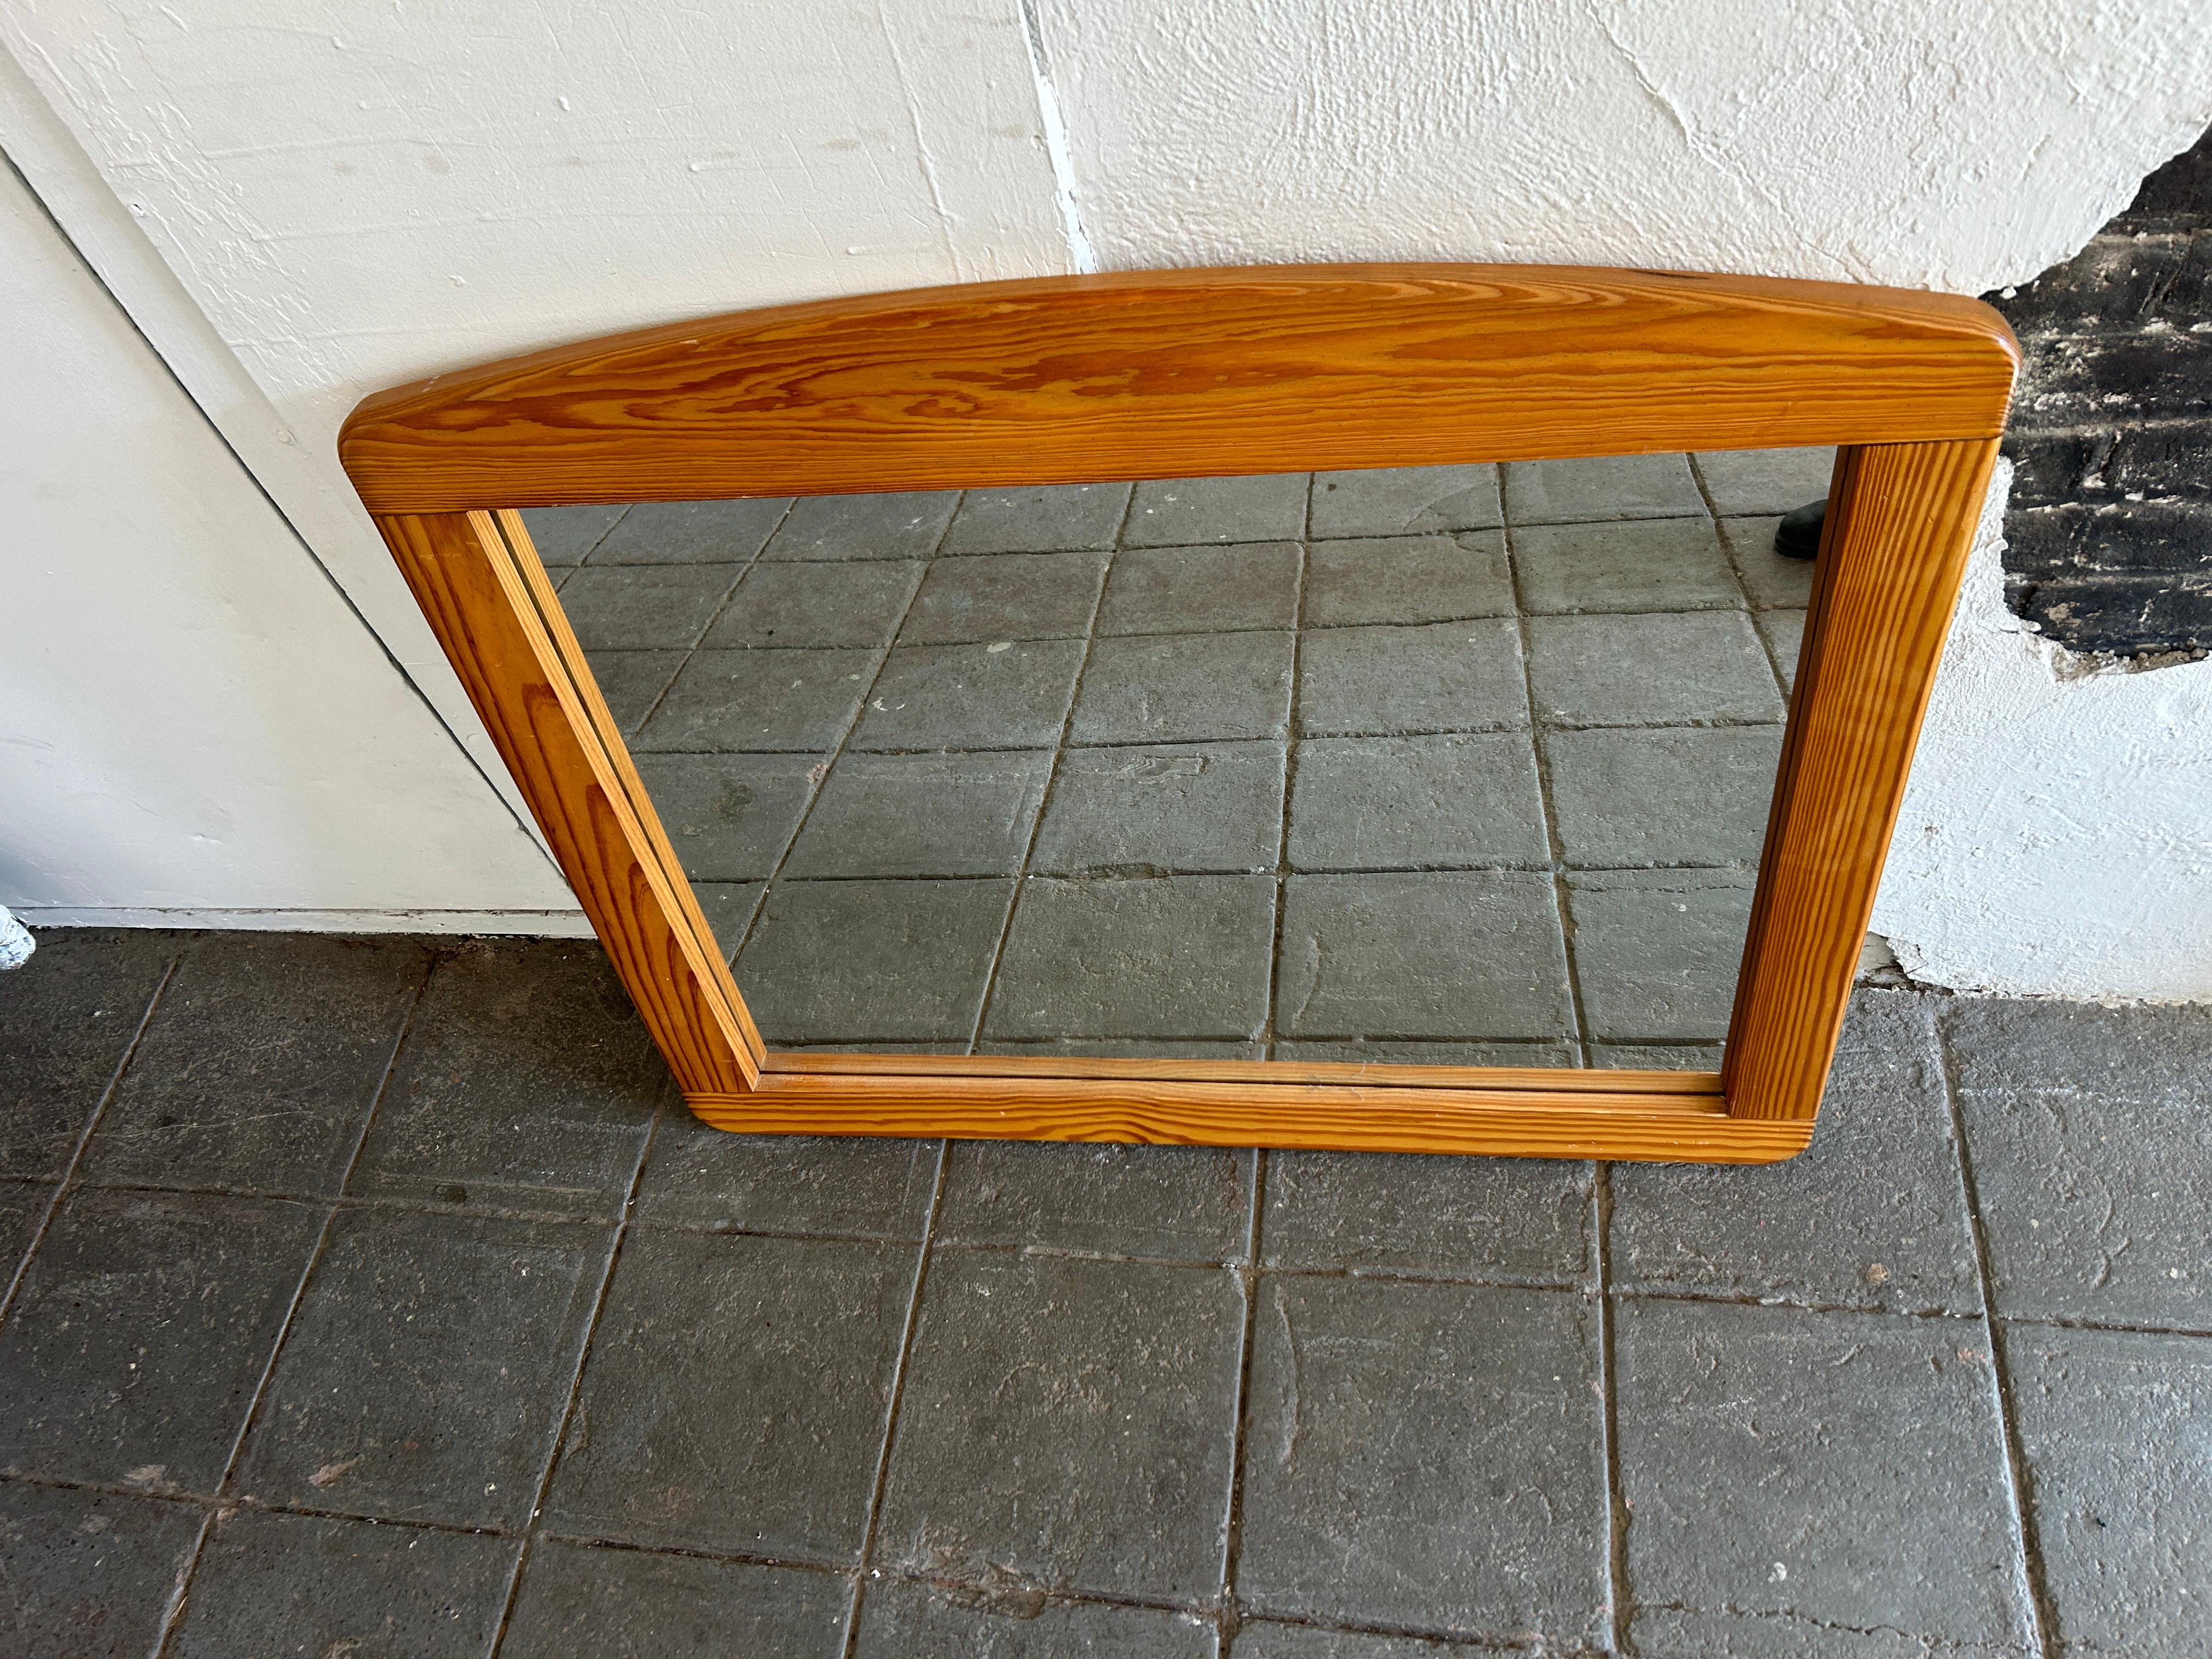 Mid century Scandinavian modern horizontal wall mirror. Solid pine wood frame with curved top and thick mirror. Wired to hang horizontal. Located in Brooklyn NYC.

43” w x 36” h x 1.5” thick